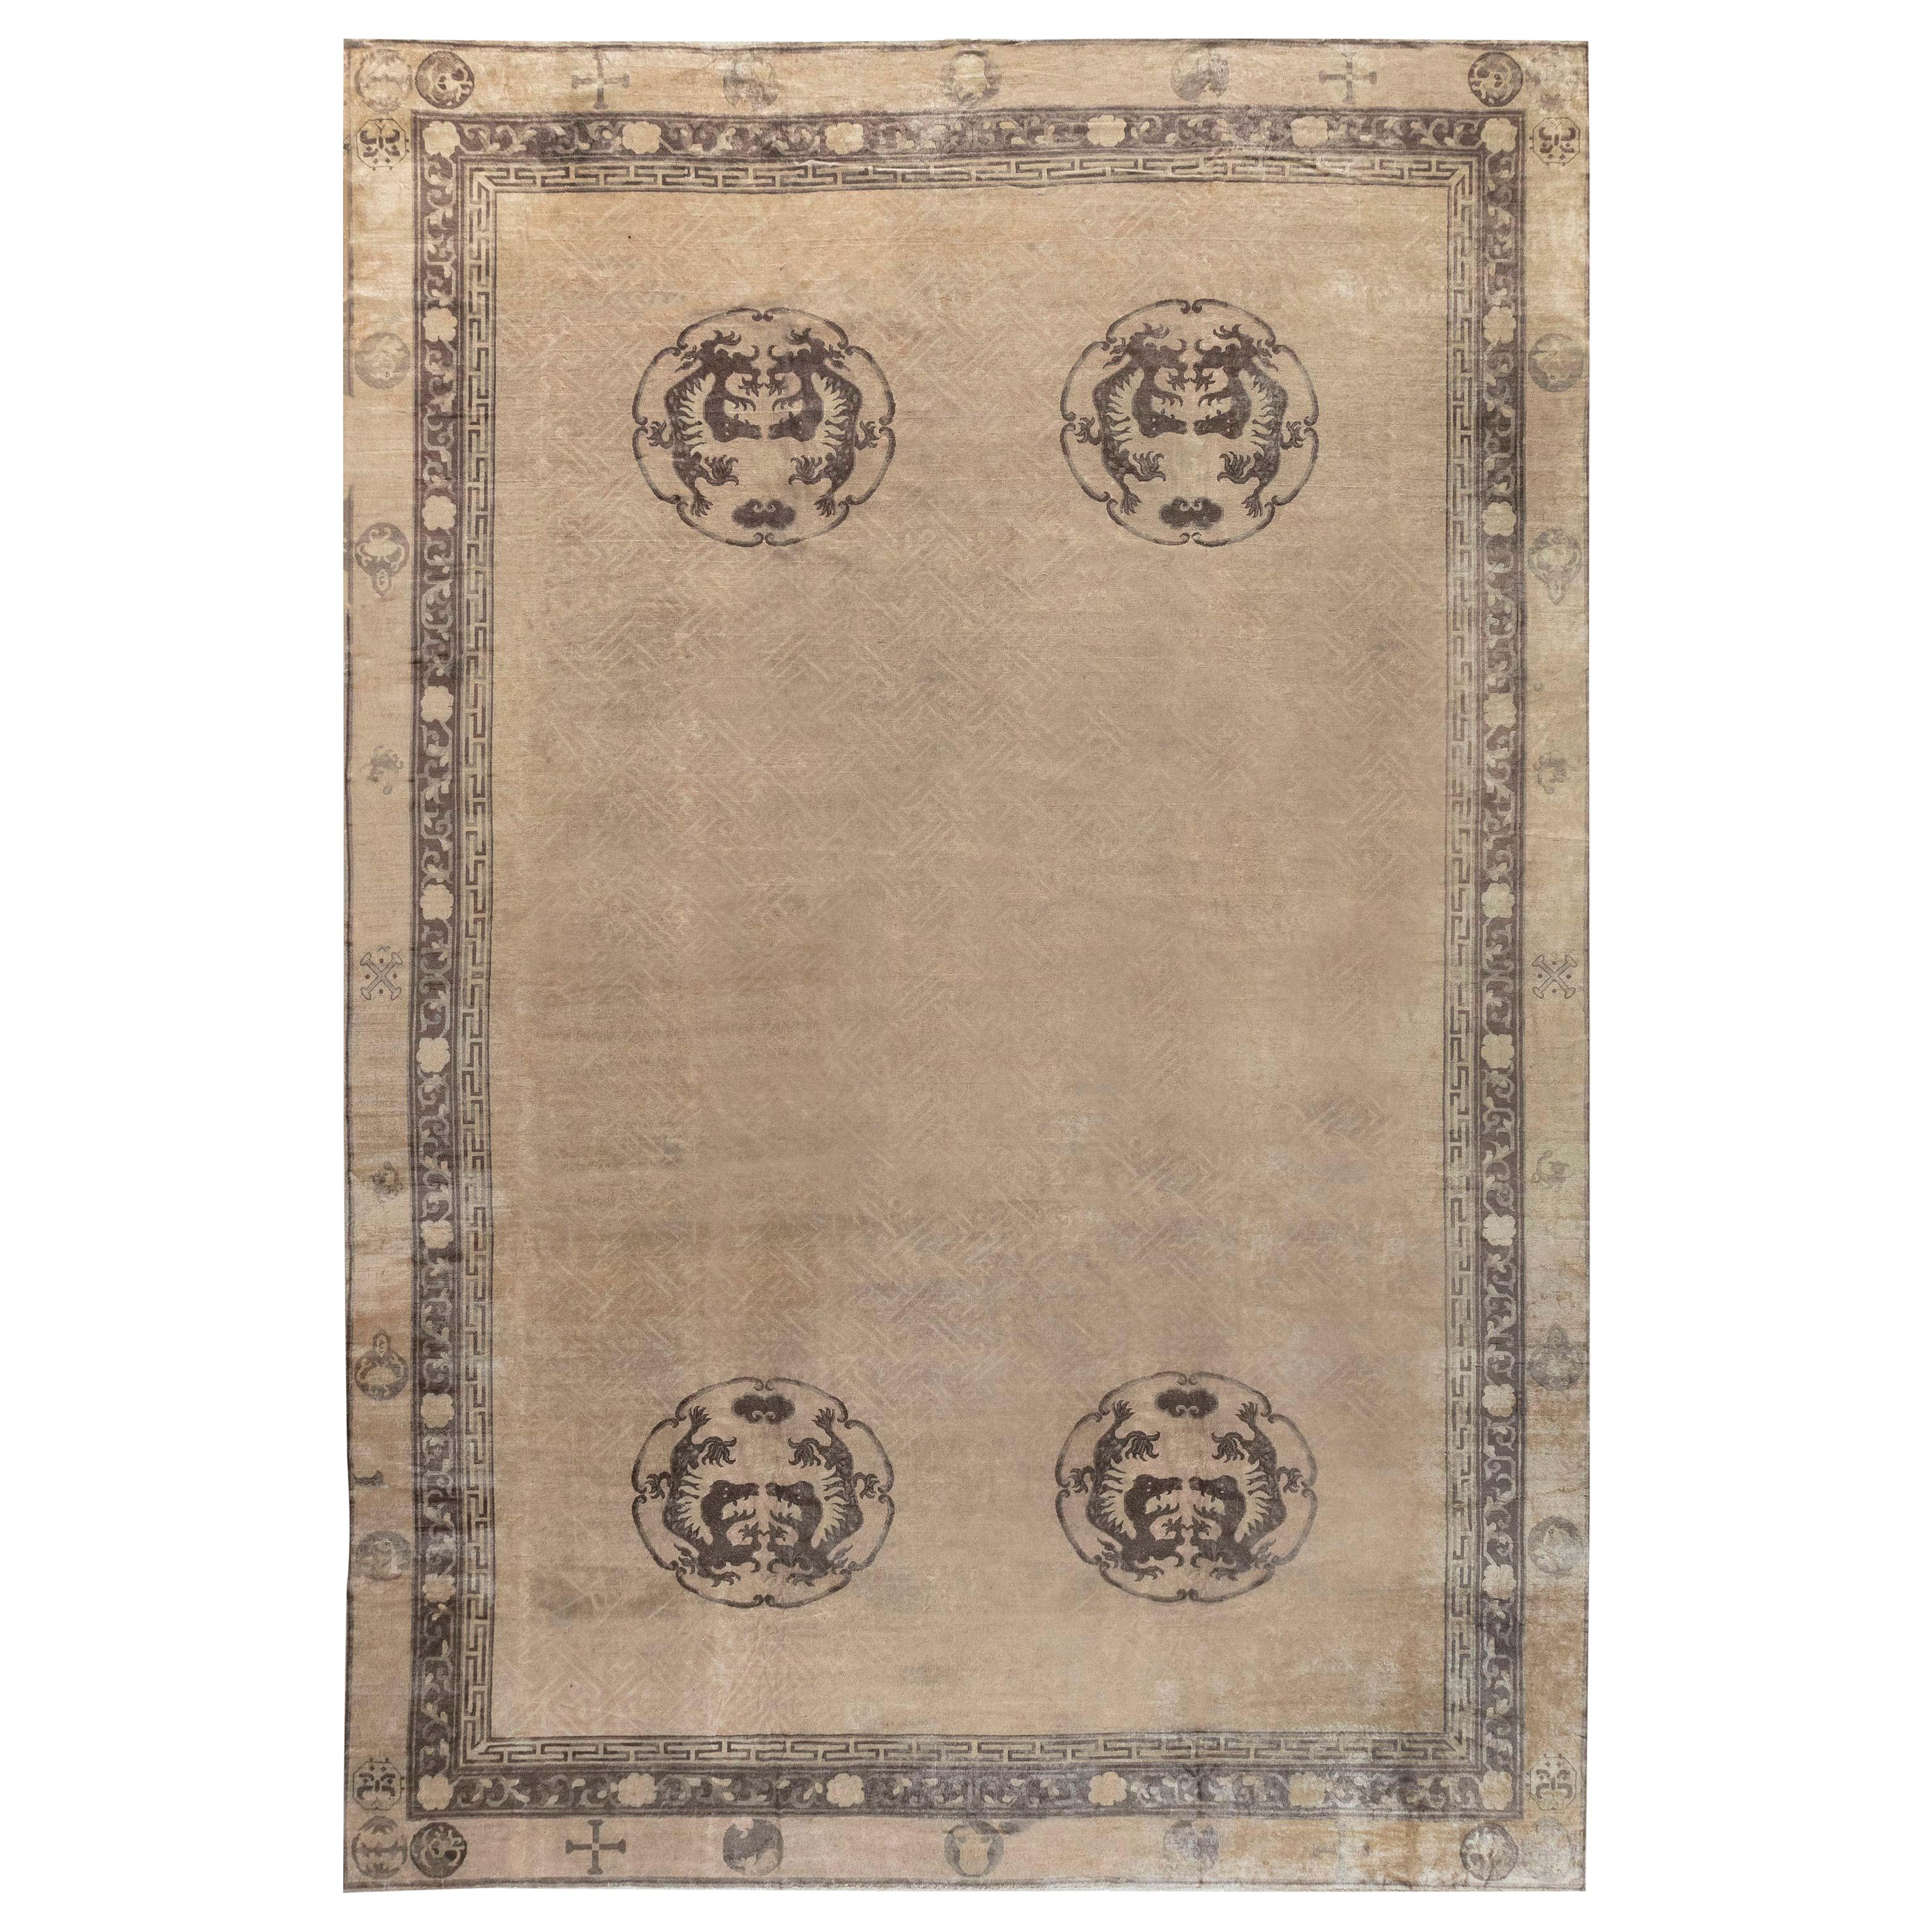 Early 20th Century Anmal Motifs Camel Background Chinese Handmade Wool Rug For Sale